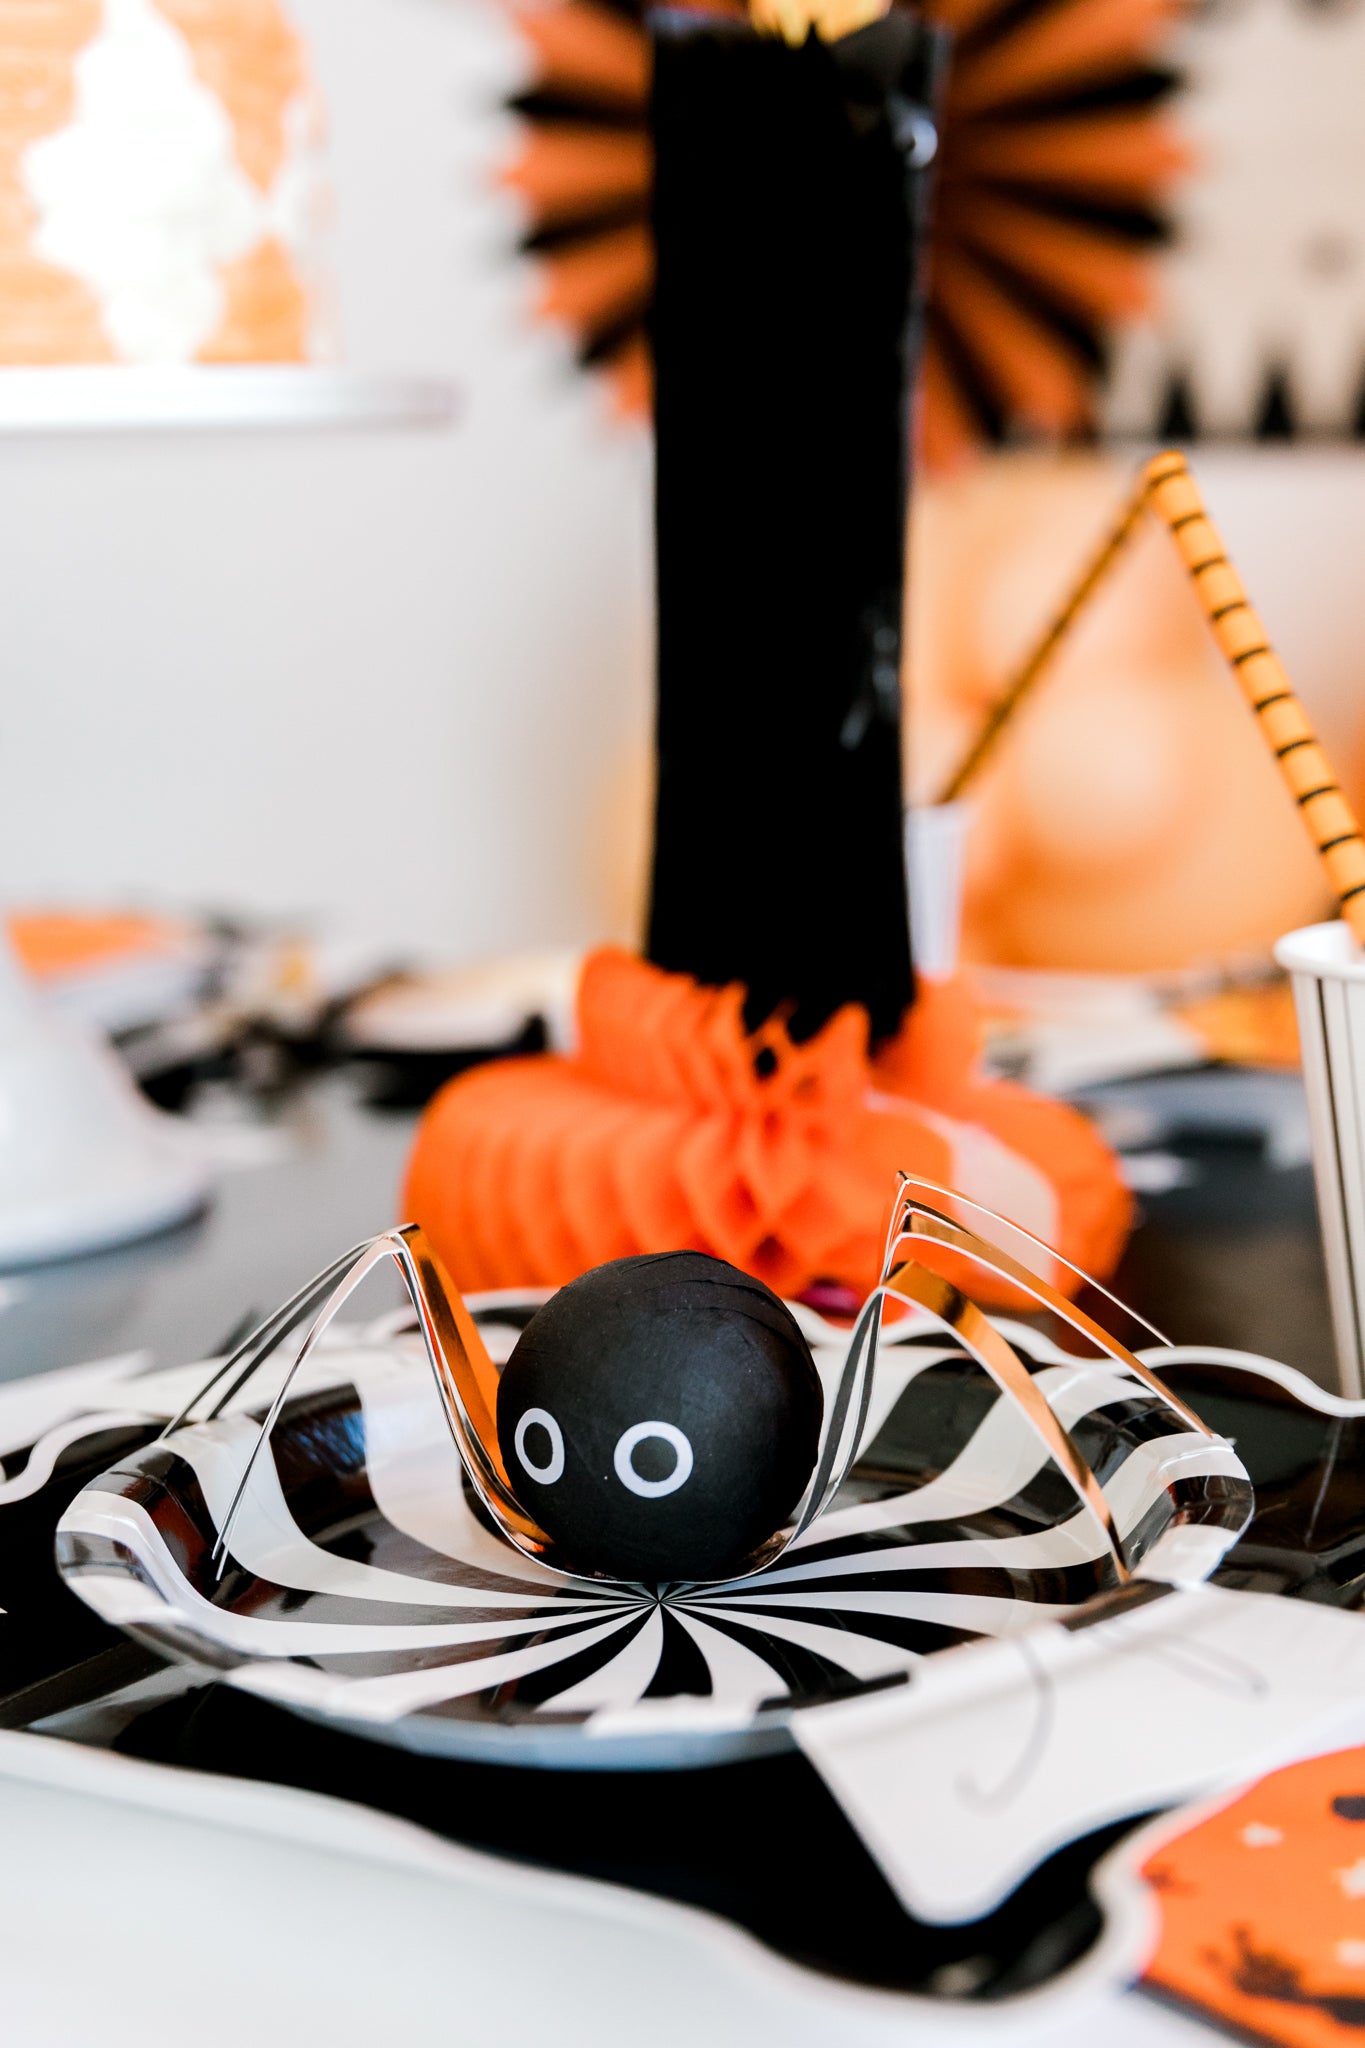 Spider surprise balls used as Vintage Halloween party favors.